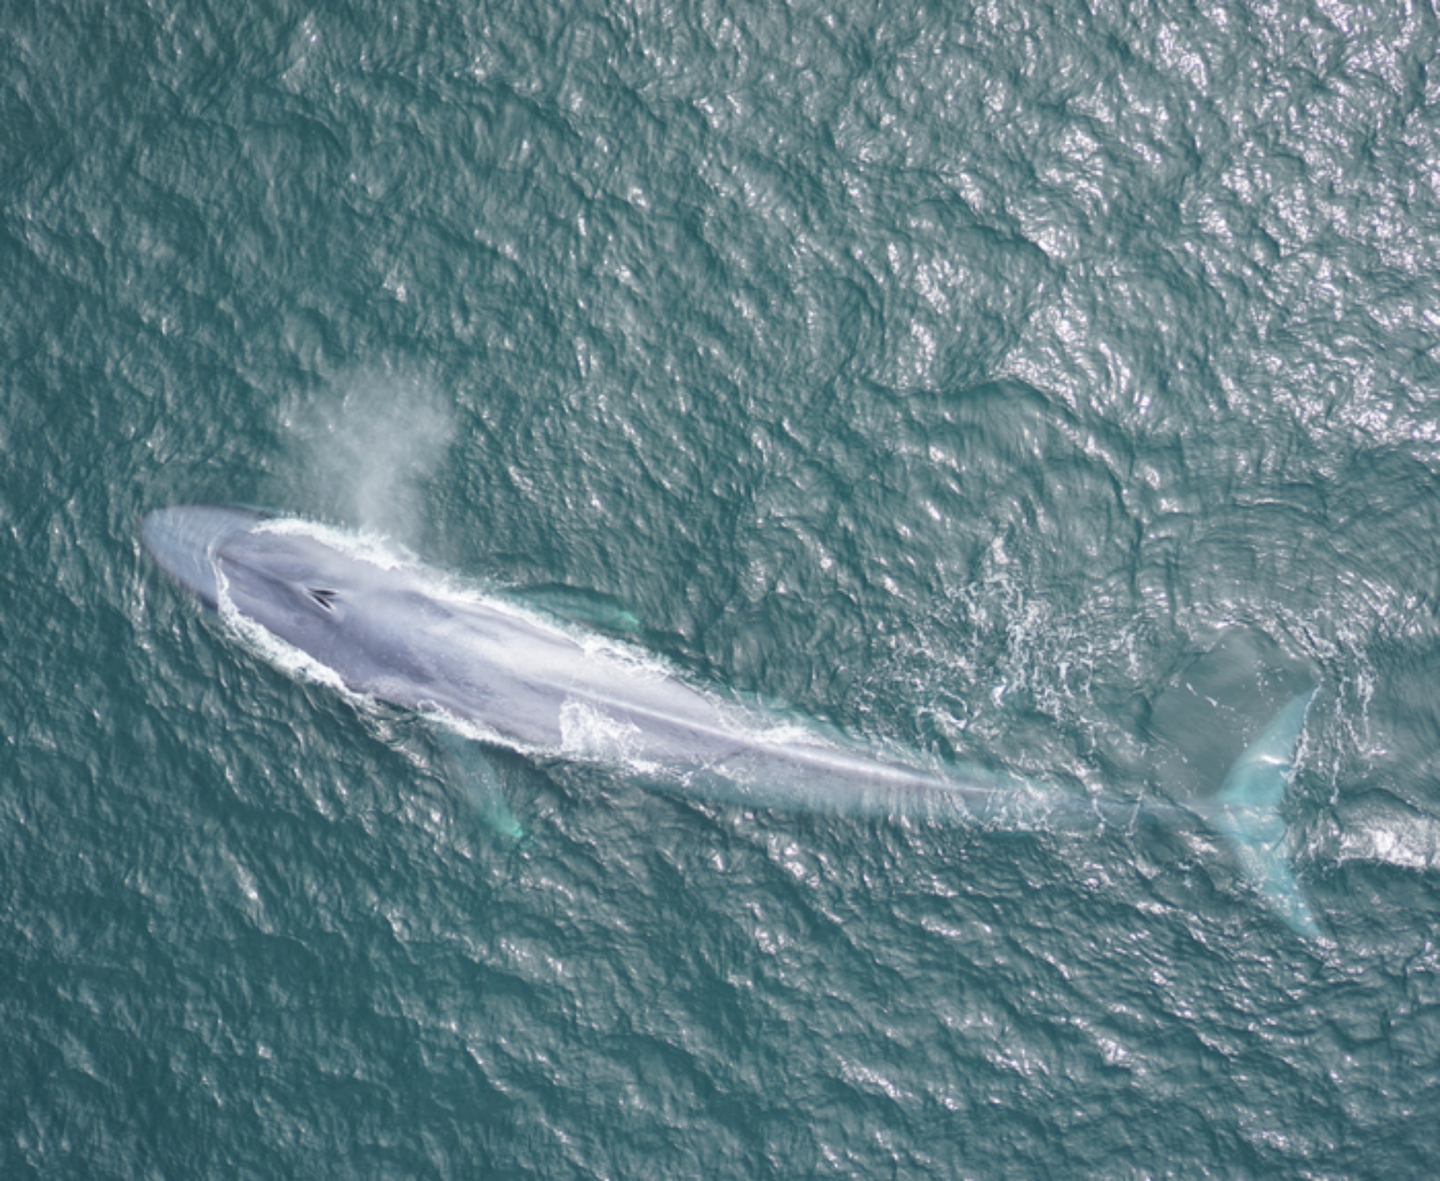 Blue whales follow wind-driven upwelling to find rich patches of food.